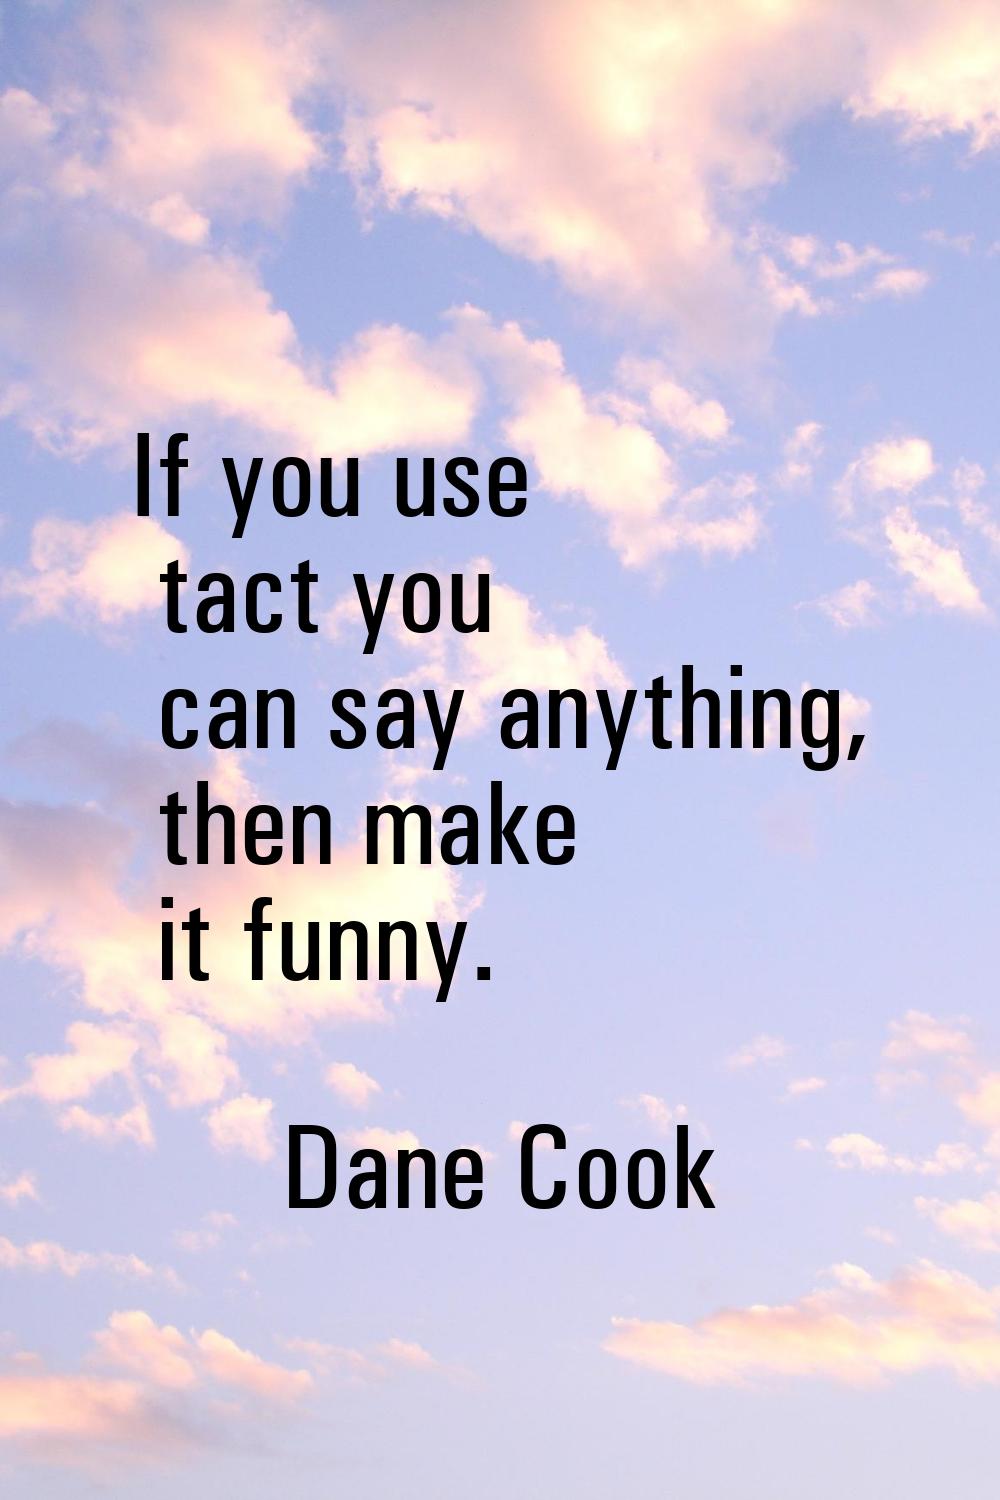 If you use tact you can say anything, then make it funny.